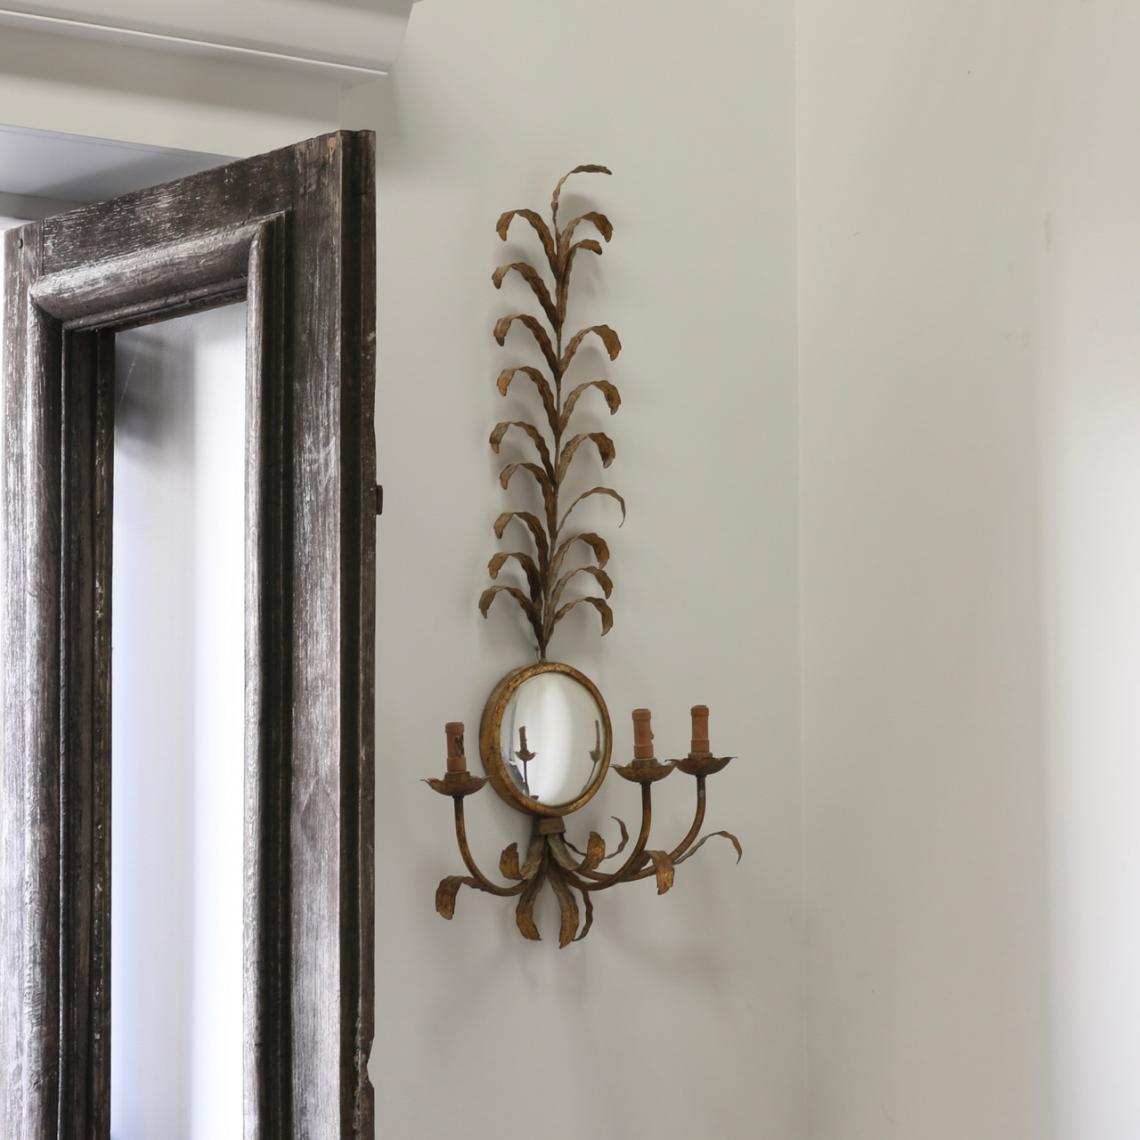 115-55 - Pair of Mirrored Wall Sconces